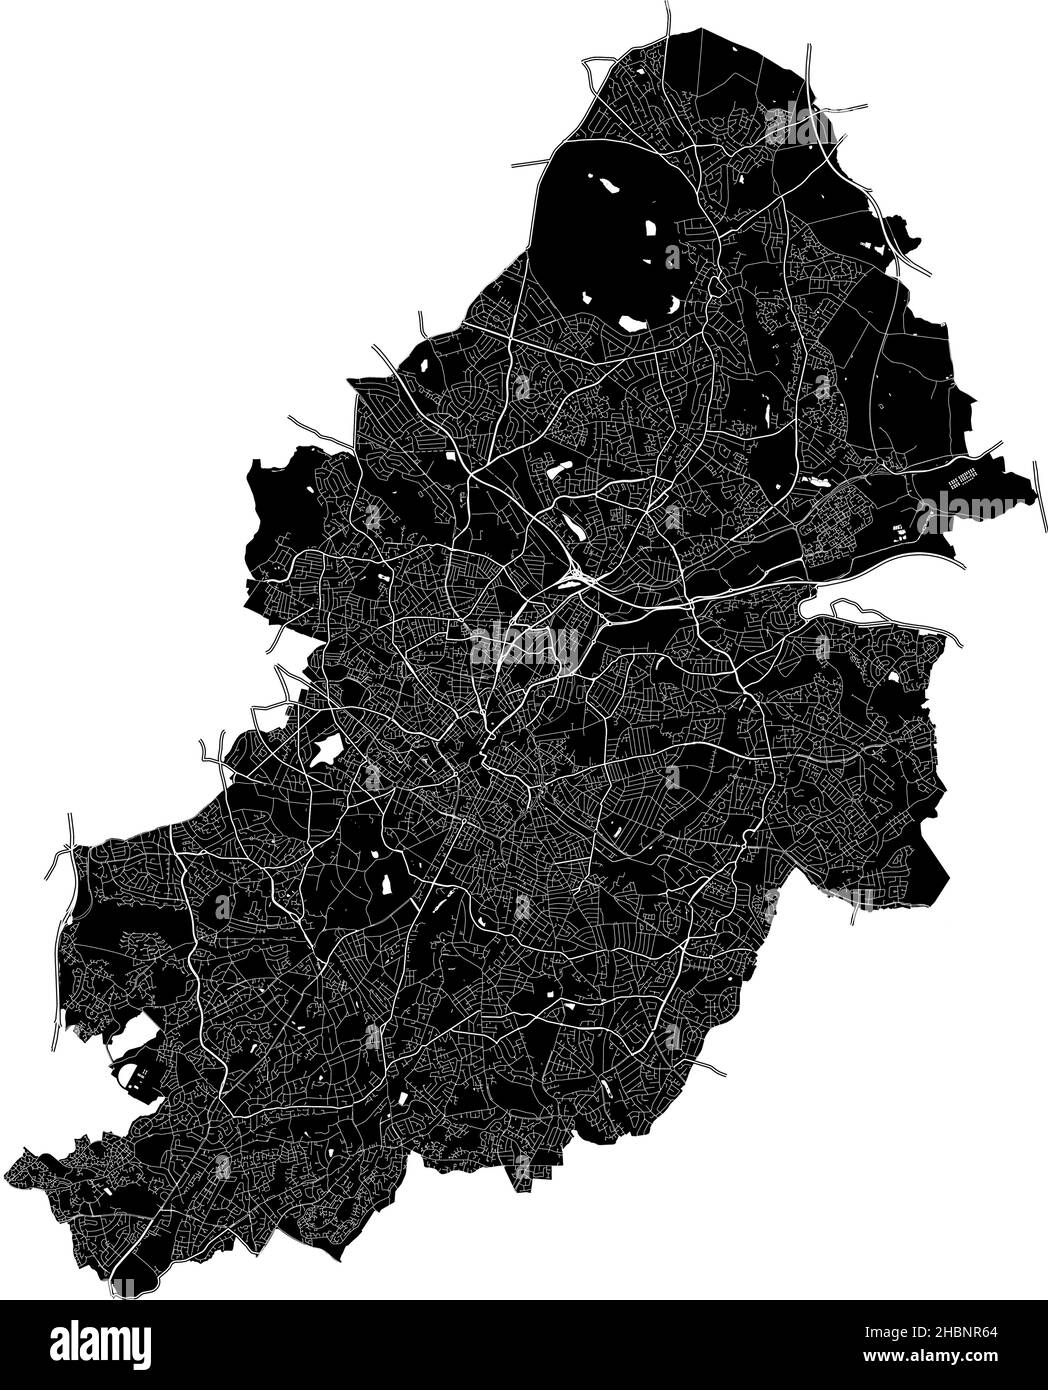 Birmingham, England, high resolution vector map with city boundaries, and editable paths. The city map was drawn with white areas and lines for main r Stock Vector